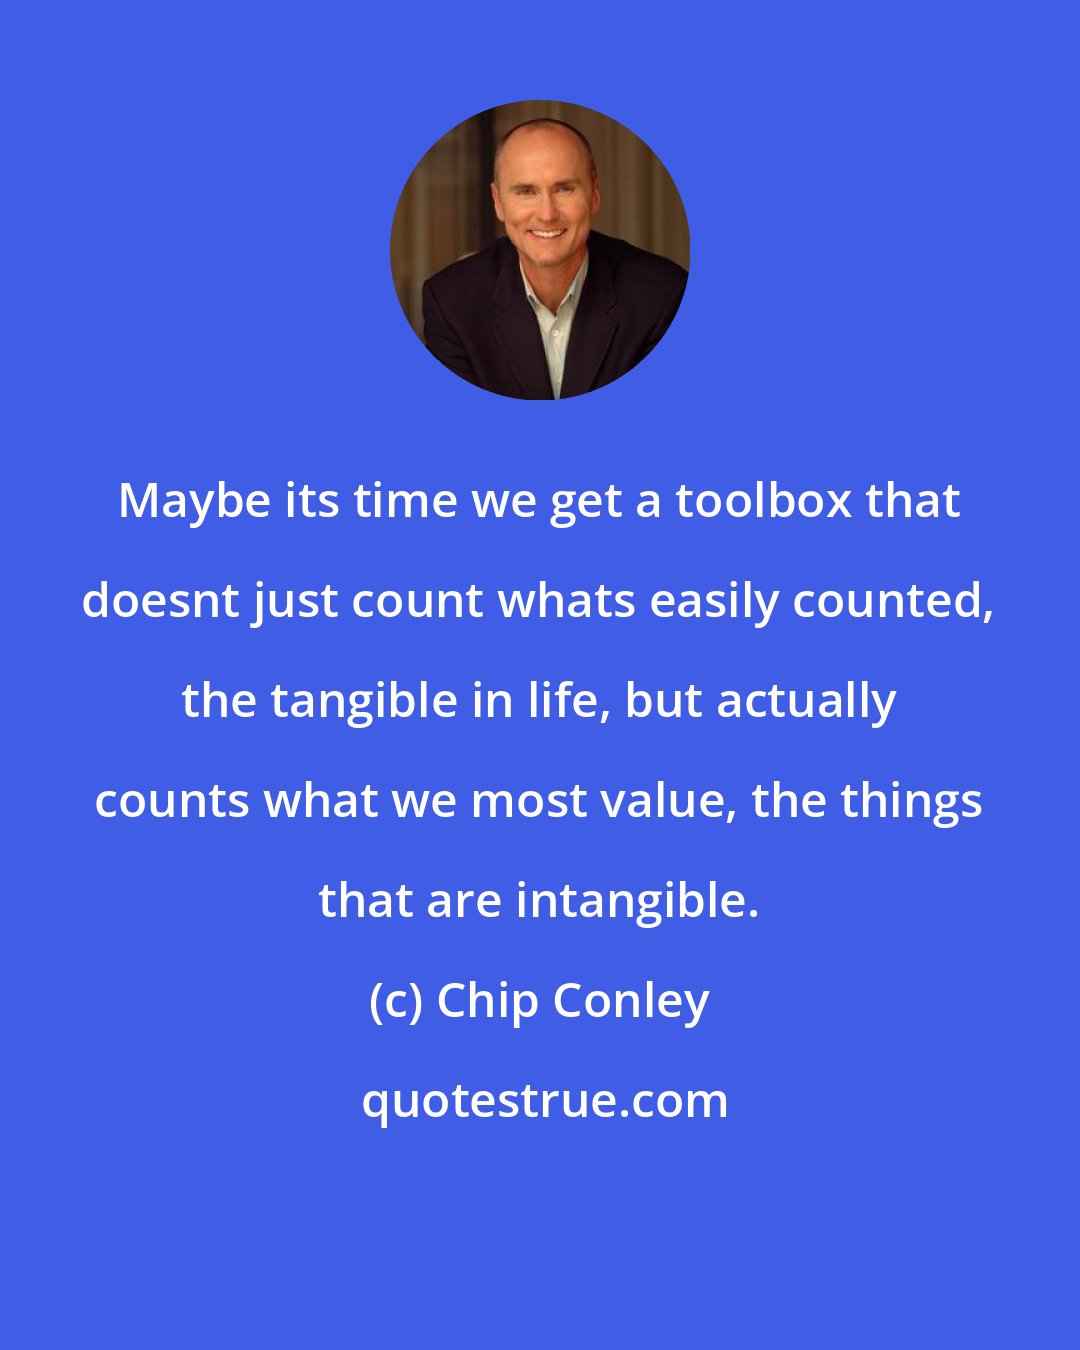 Chip Conley: Maybe its time we get a toolbox that doesnt just count whats easily counted, the tangible in life, but actually counts what we most value, the things that are intangible.